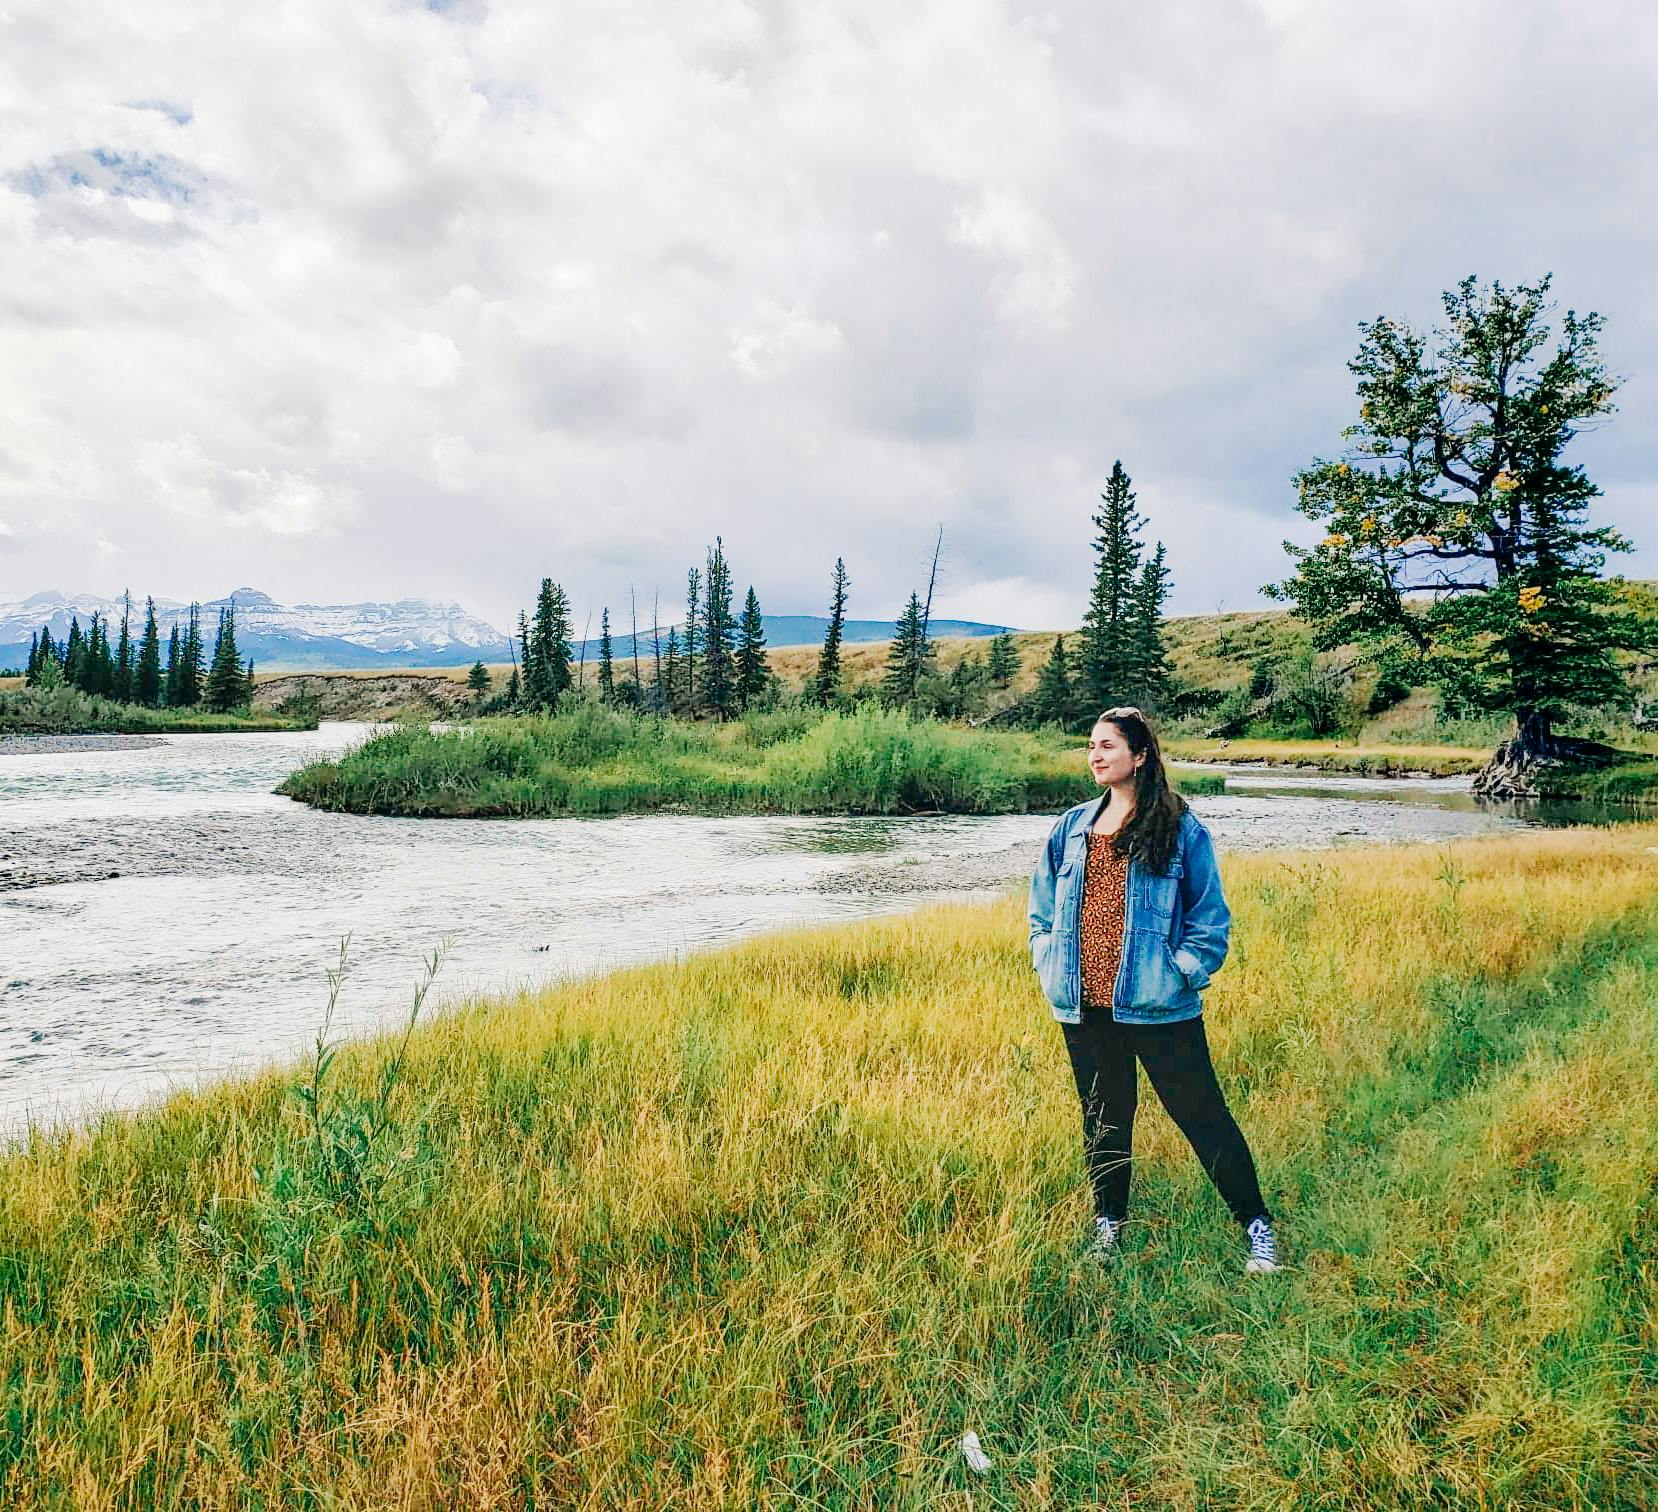 Leah stands at the edge of a river with the Rocky Mountains in the distance.